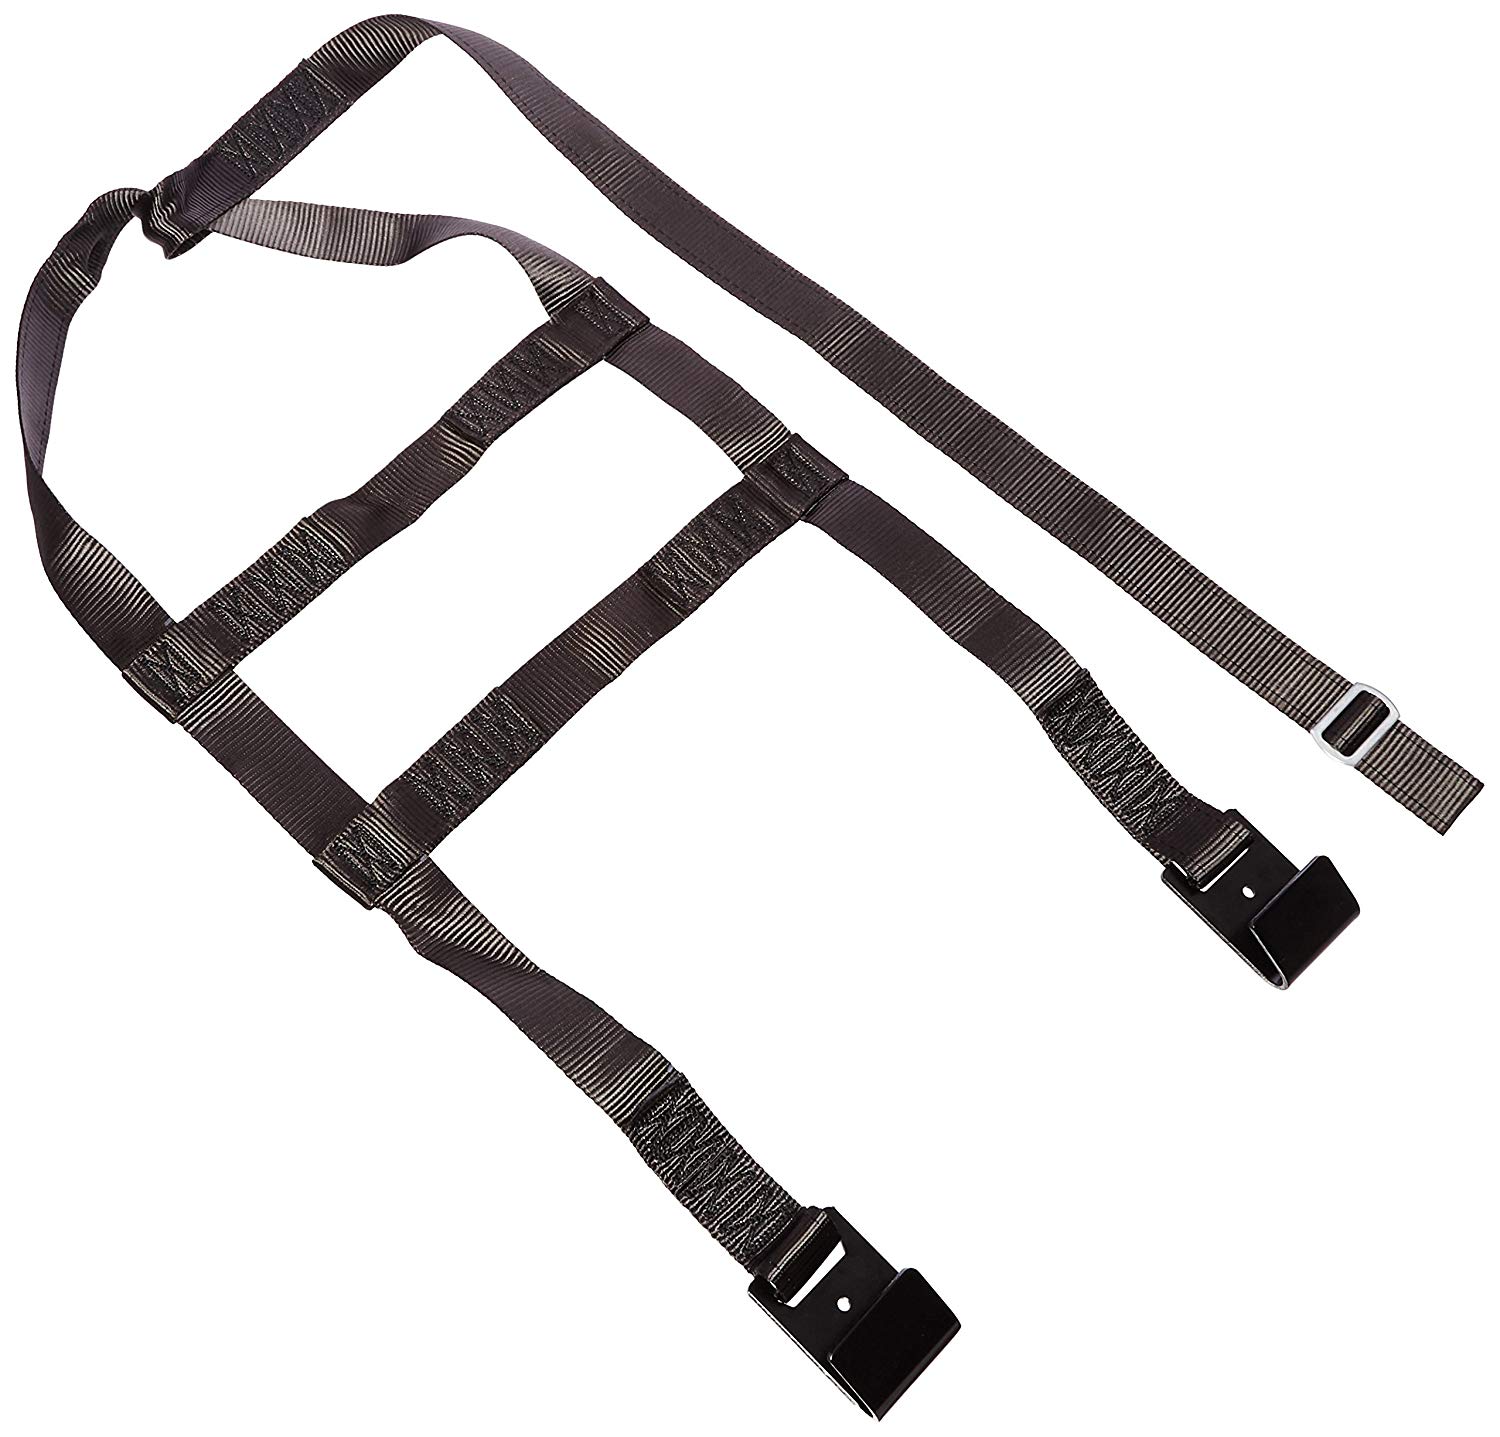 Demco 03528 Replacement Tow Dolly Tie-Down Strap